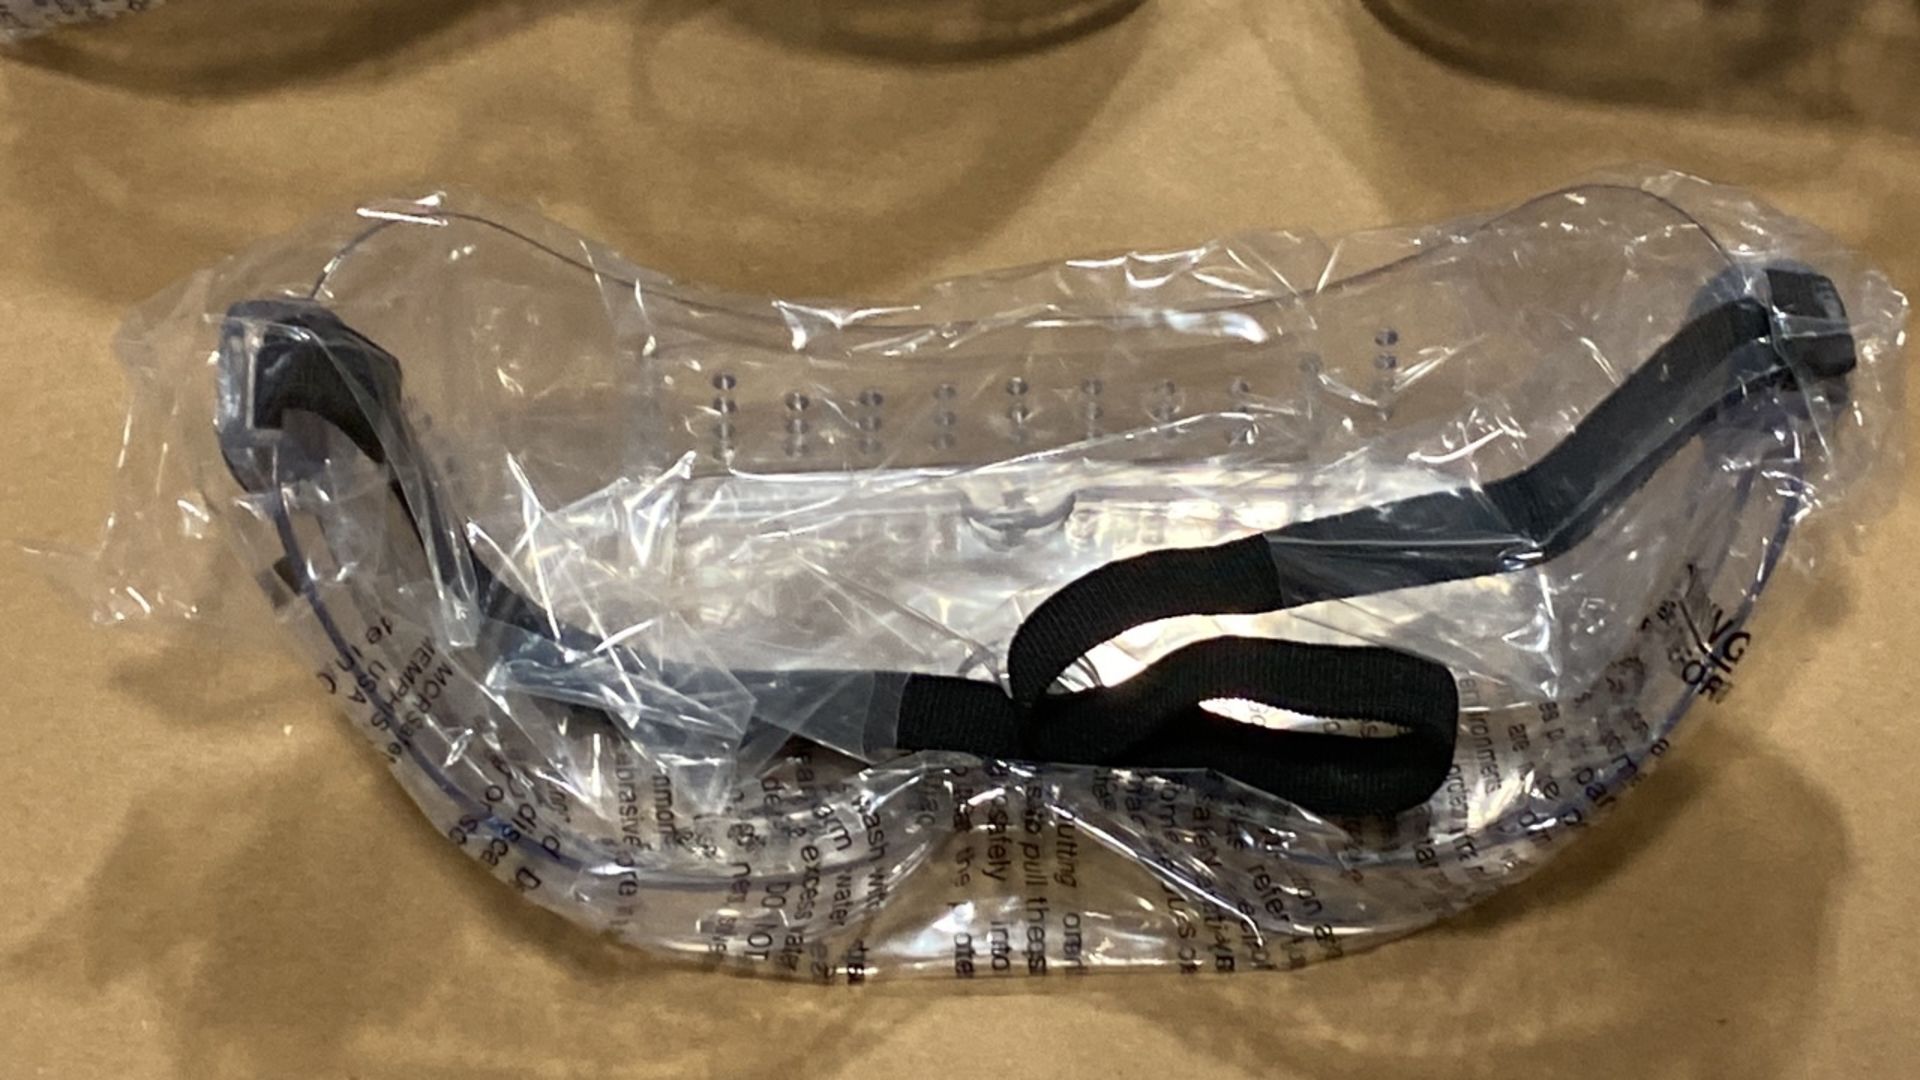 CREWS SAFETY GOGGLES QTY:24 CASES/ 144 UNITS PER CASE - Image 7 of 8